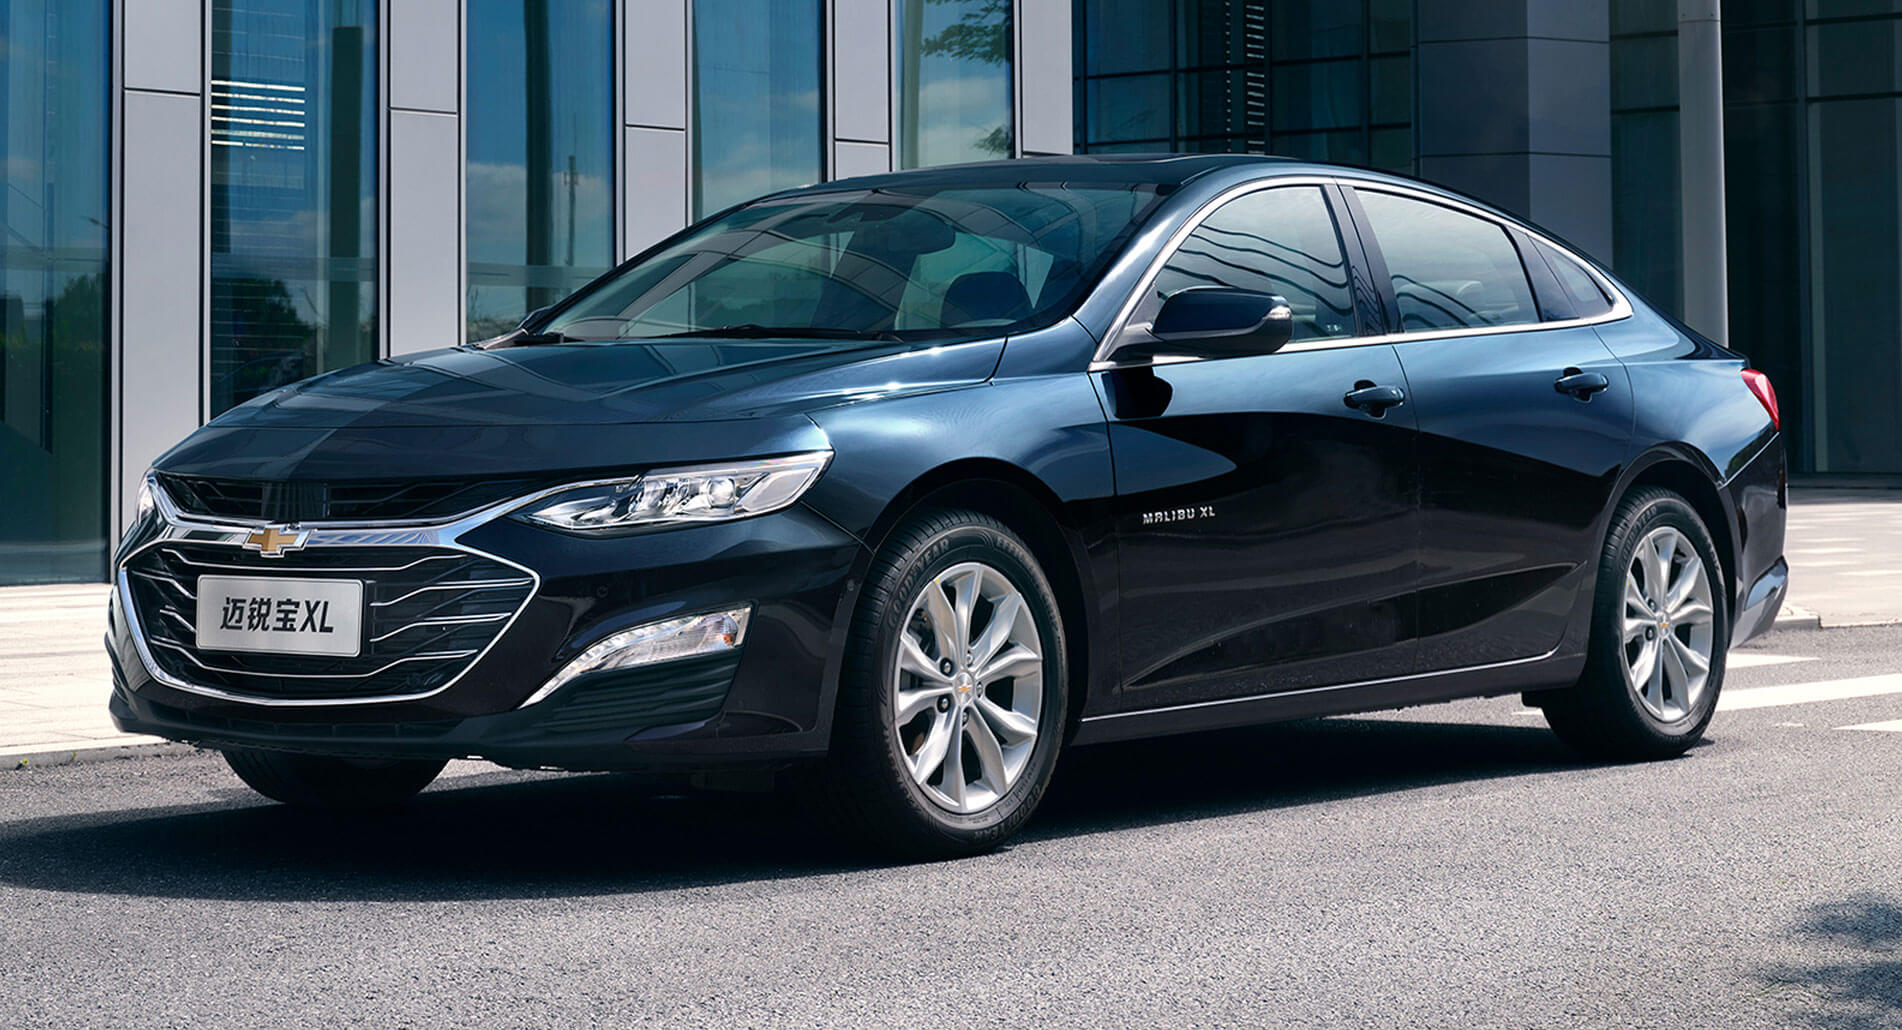 China’s Chevy Malibu XL Gains New 1.5L Engine From The